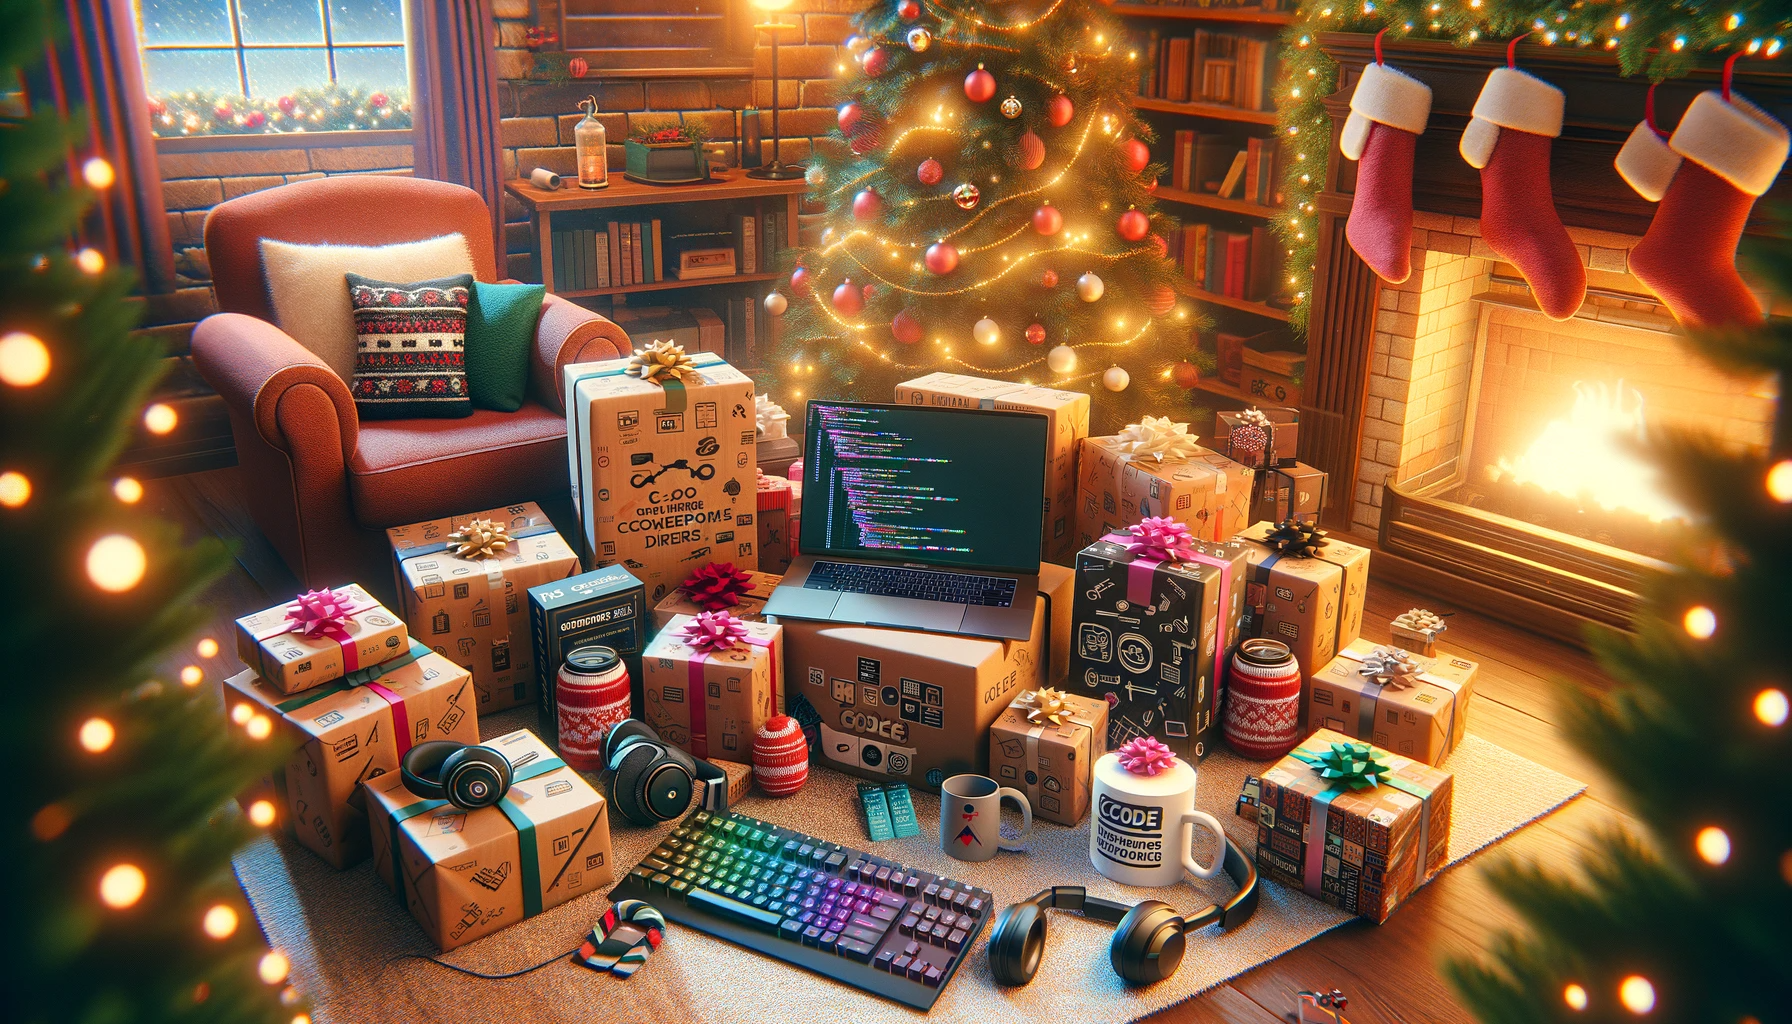 Ideal Christmas Gifts for Developers: A Coding Enthusiast’s Holiday Wishlist